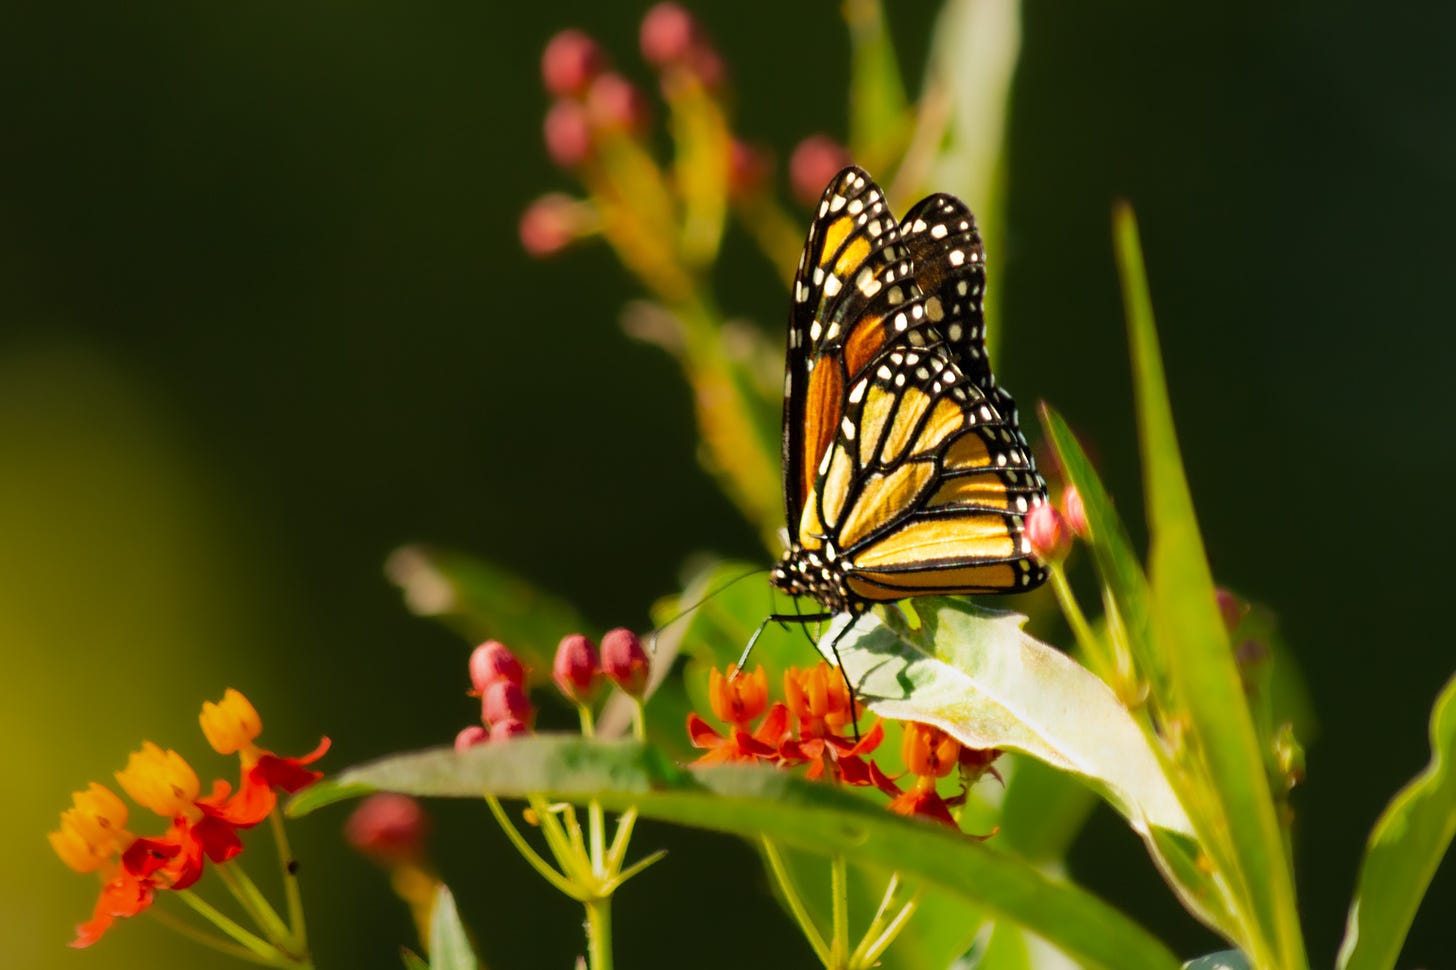 A monarch butterfly hovers above the leaves of a Butterfly Bush sipping nectar from the orange flowers